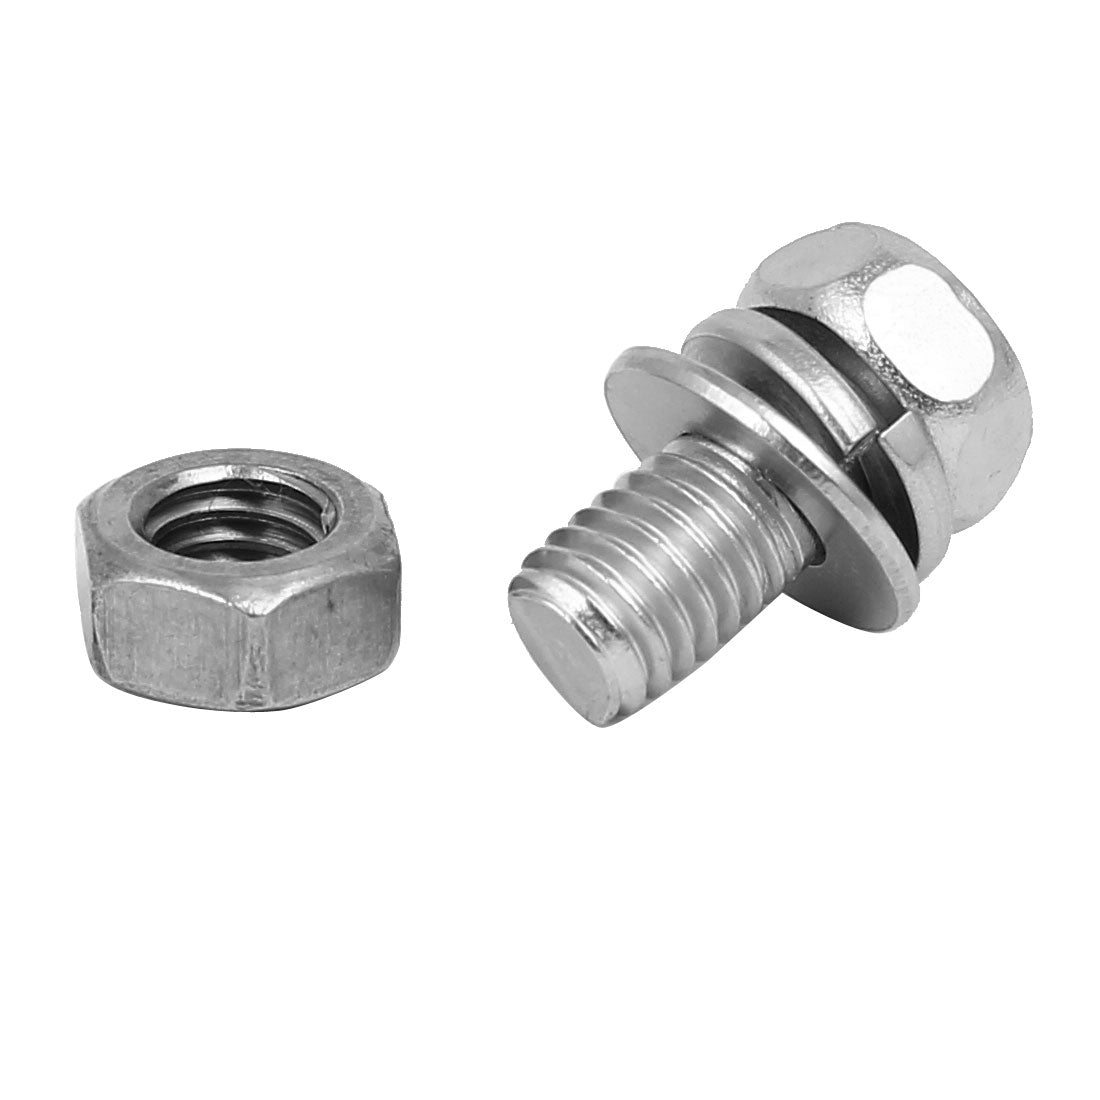 uxcell Uxcell M5 x 10mm 304 Stainless Steel Phillips Hex Head Bolts Nuts W Washers 15 Sets